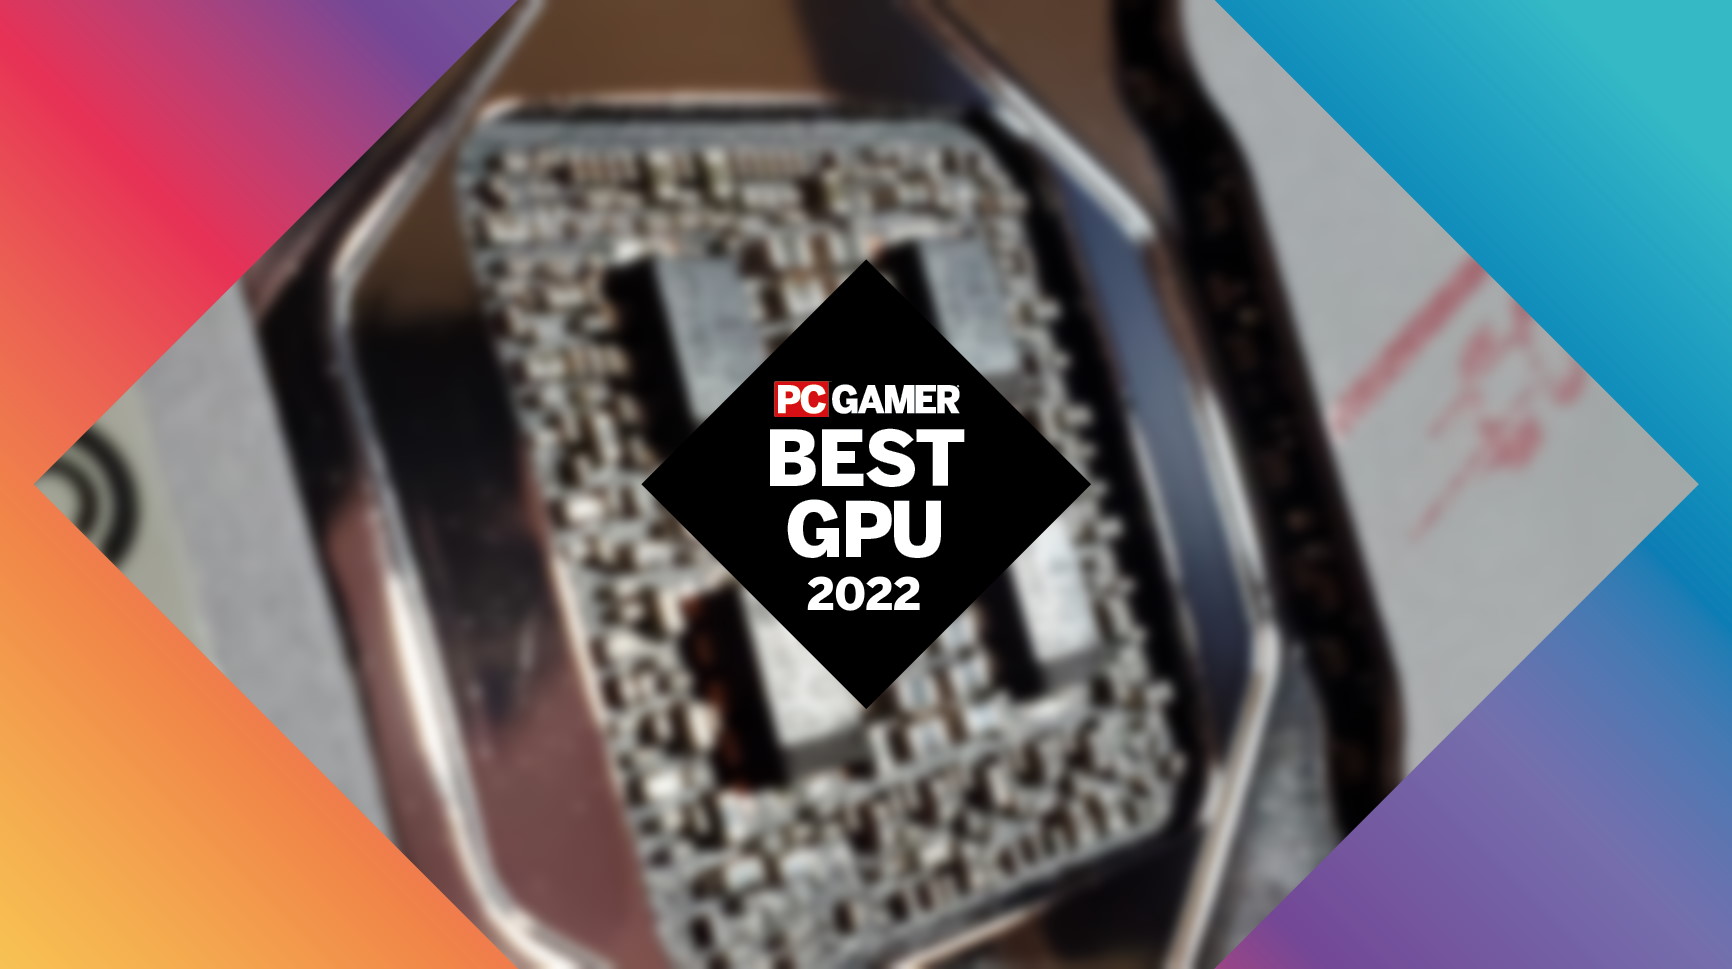  PC Gamer Hardware Awards: The best graphics card of 2022 